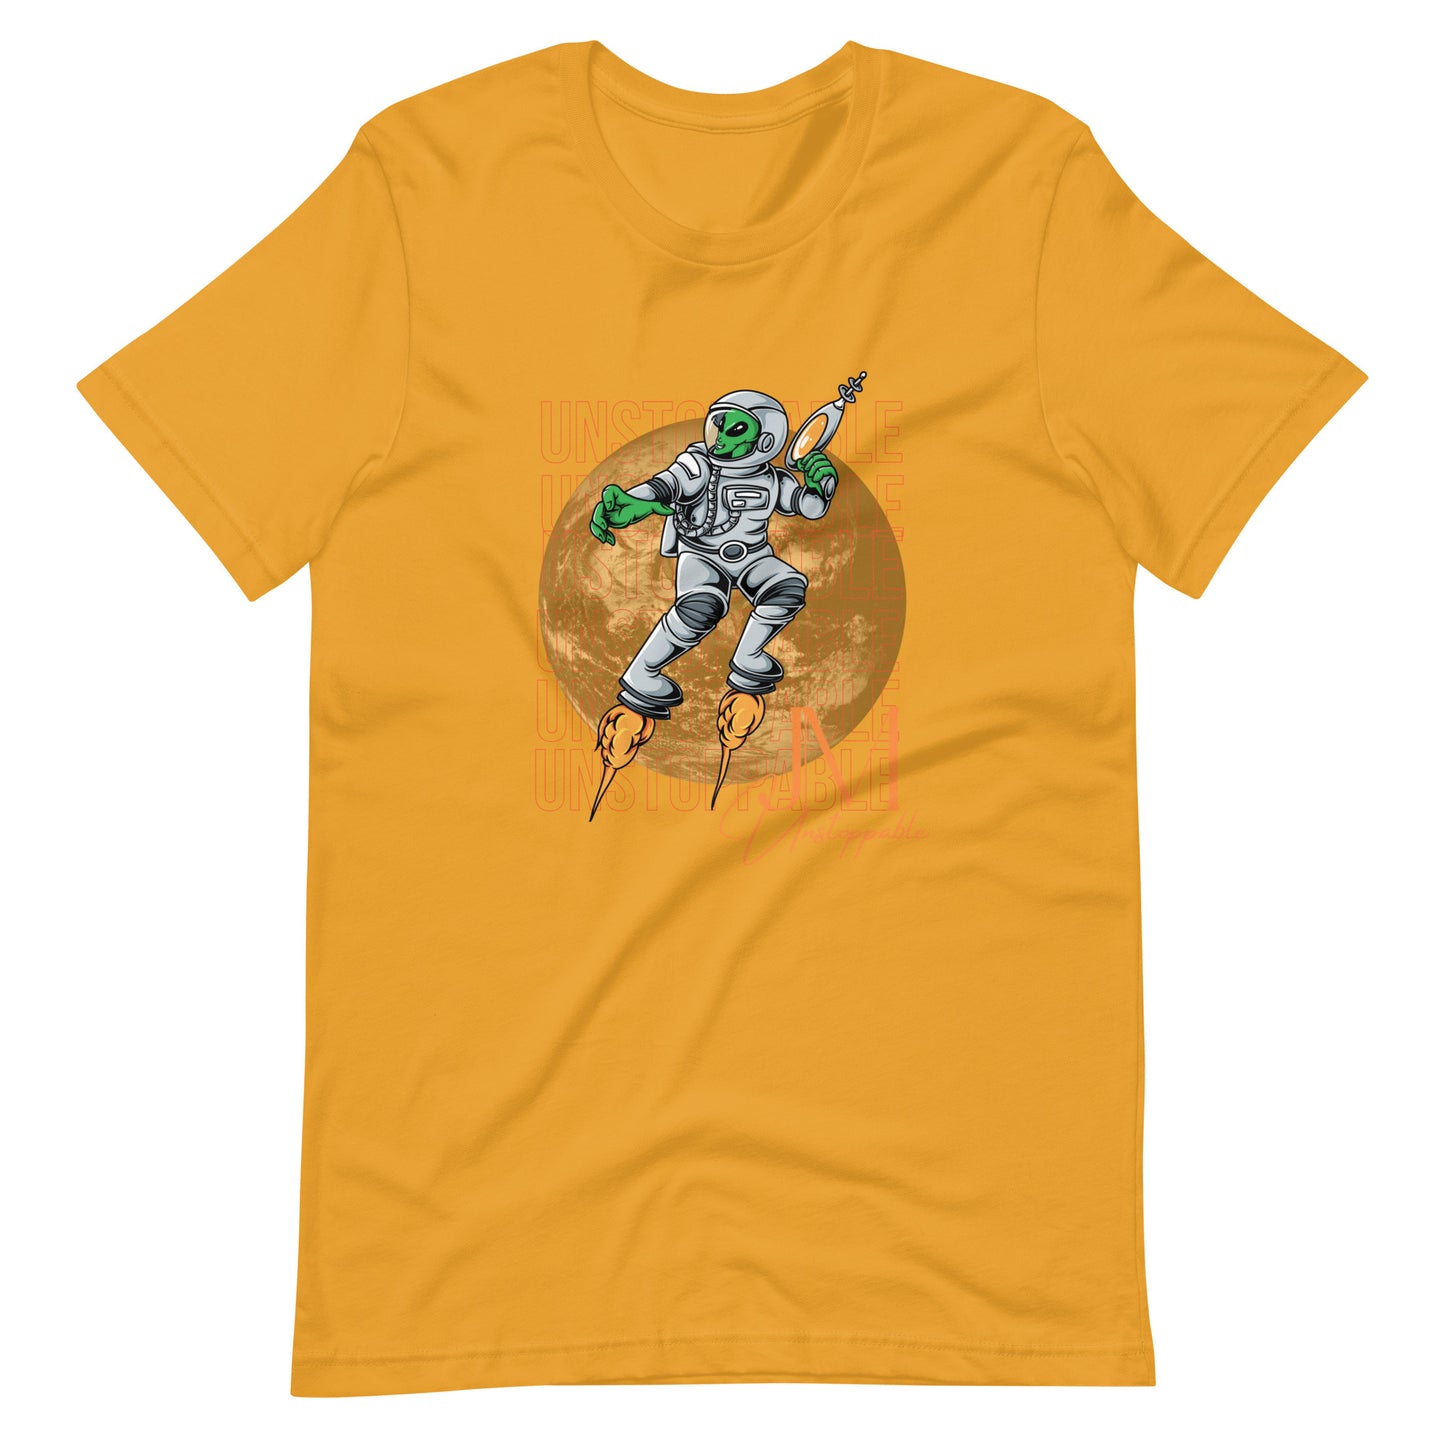 Out of this world Unisex t-shirt